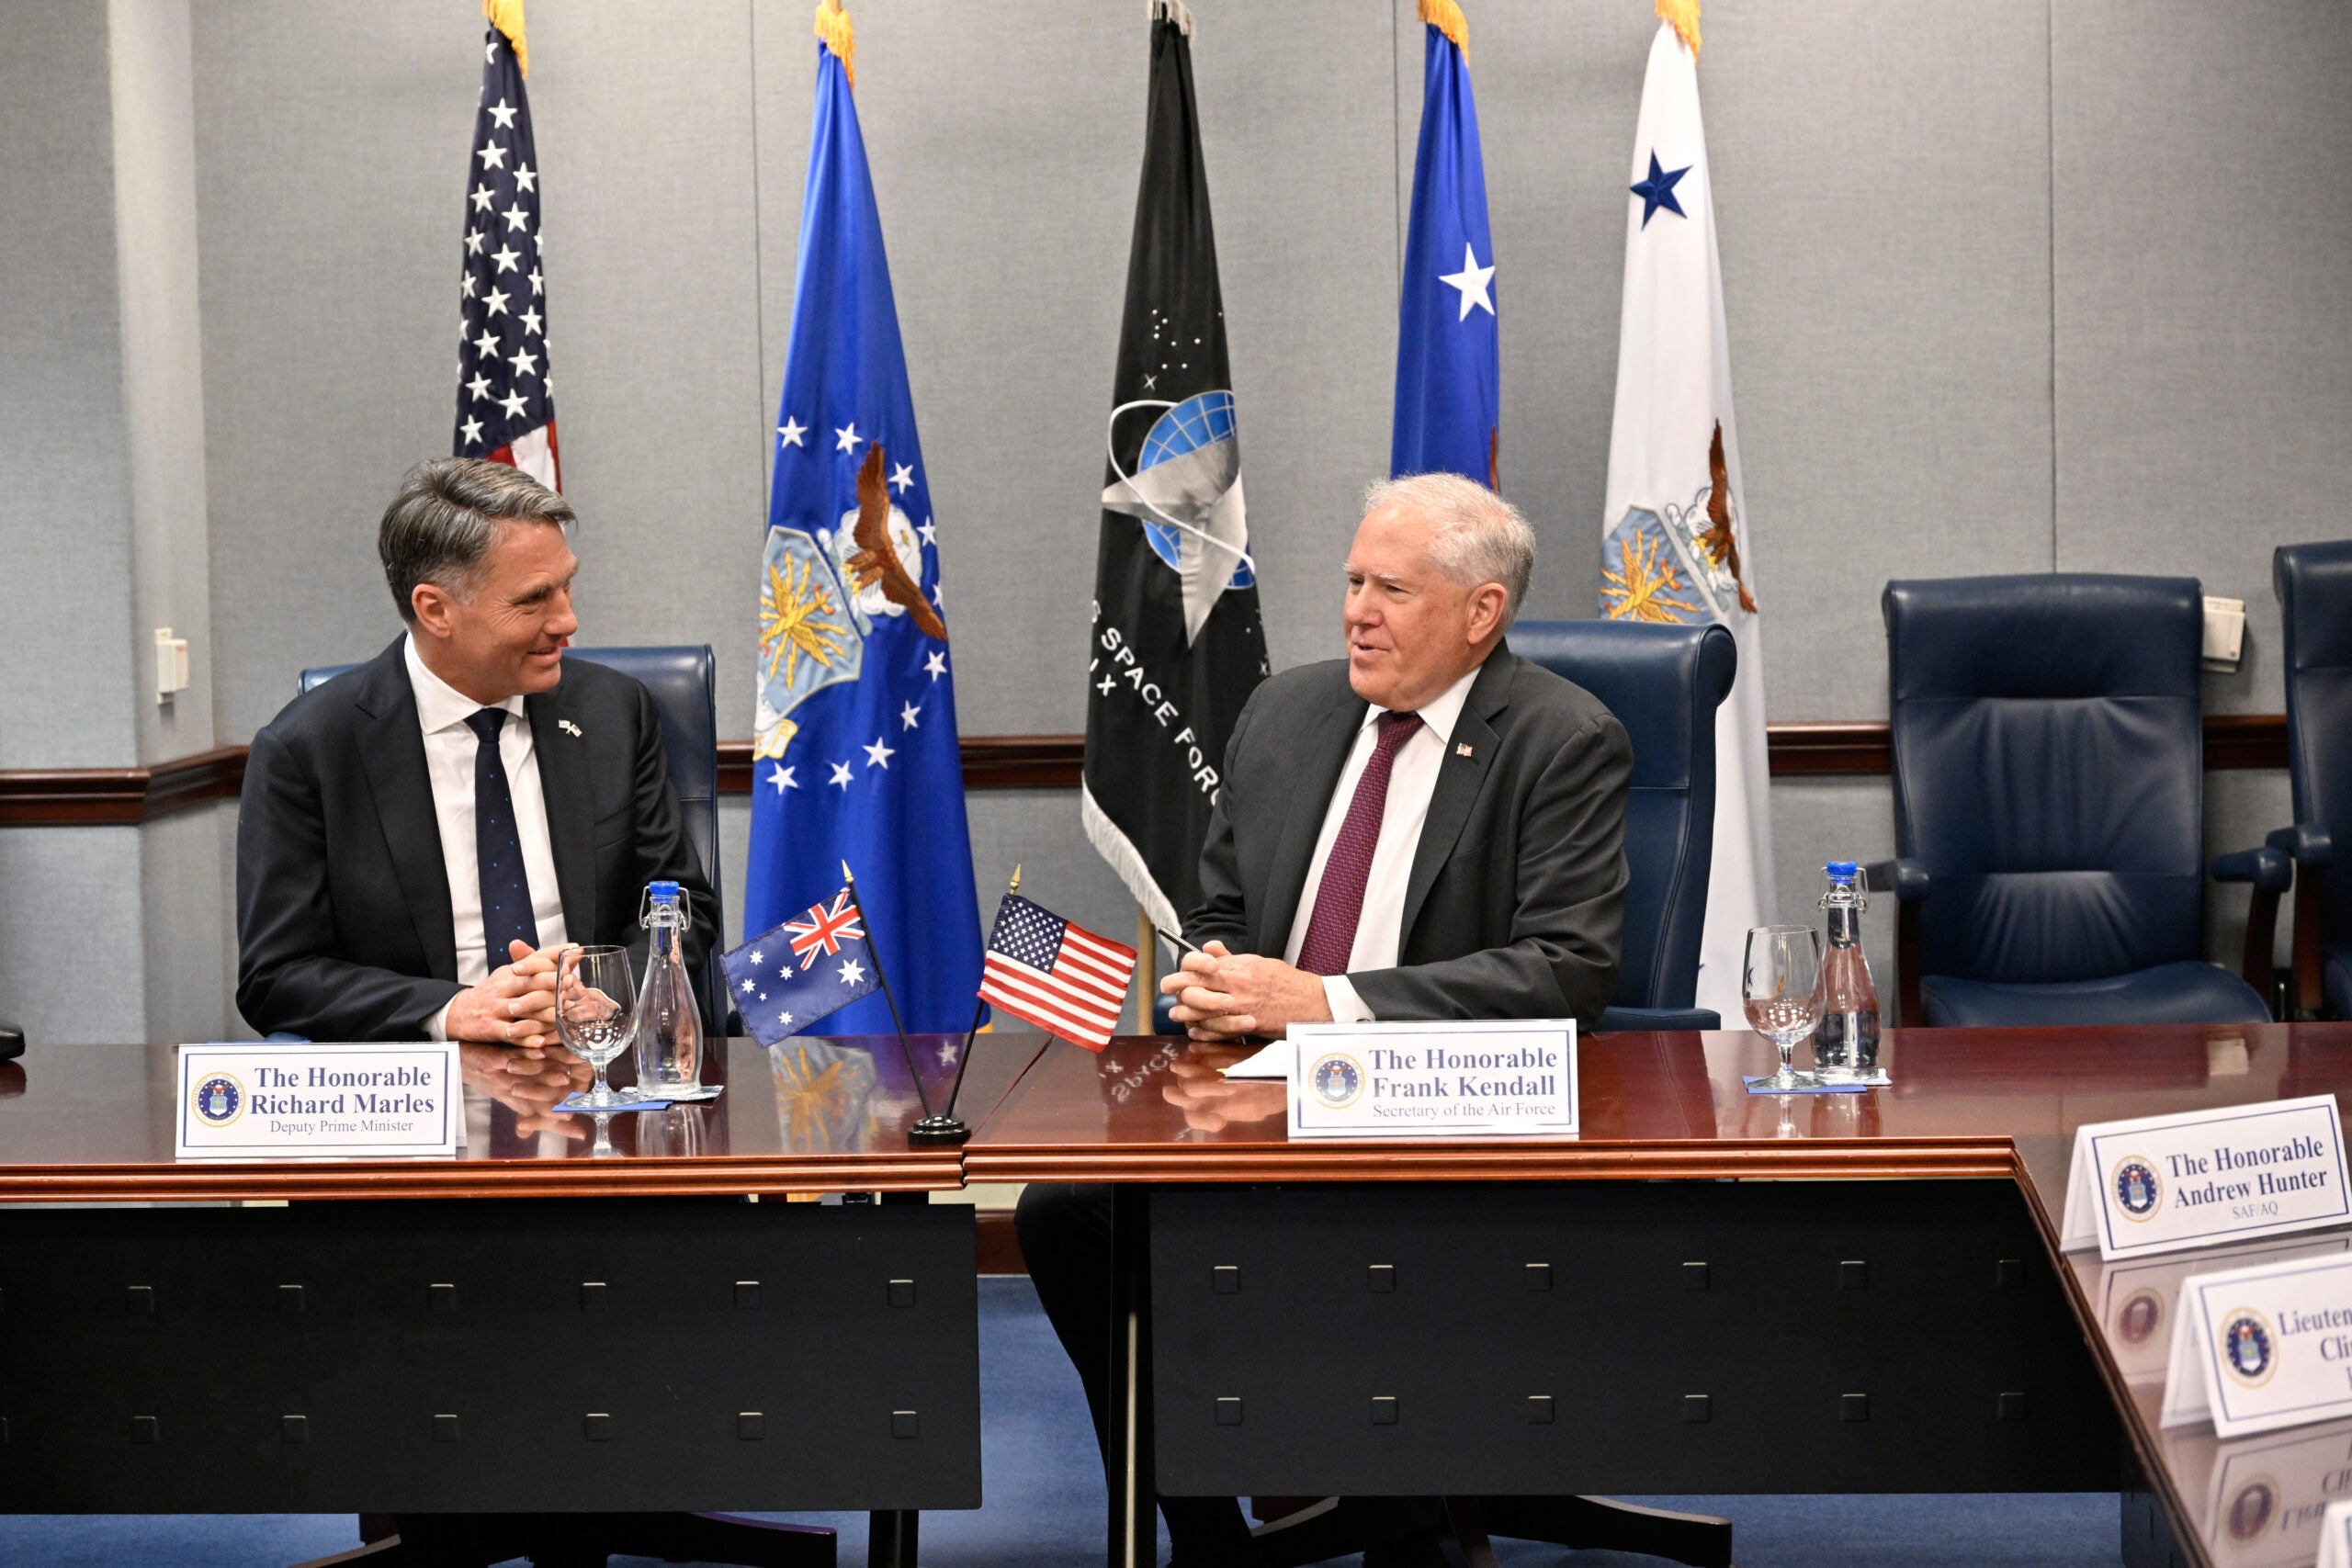 Deputy Prime Minister and Minister for Defence, the Hon Richard Marles MP, with the Secretary of the United States Air Force, Frank Kendall, at their bilateral meeting at the Pentagon, Washington DC. *** Local Caption *** Deputy Prime Minister and Minister for Defence, the Hon Richard Marles MP is visiting the United States of America from 11-14 July 2022. 

In his first visit to the US since assuming office, the Deputy Prime Minister will meet his Defence counterpart, Secretary Lloyd J. Austin III, as well as members of the United States Government, Congress, the defence and national security community, and industry partners. He will be focused on deepening cooperation within the Alliance, working to maintain progress under AUKUS, and furthering our shared vision of a resilient and inclusive Indo-Pacific.